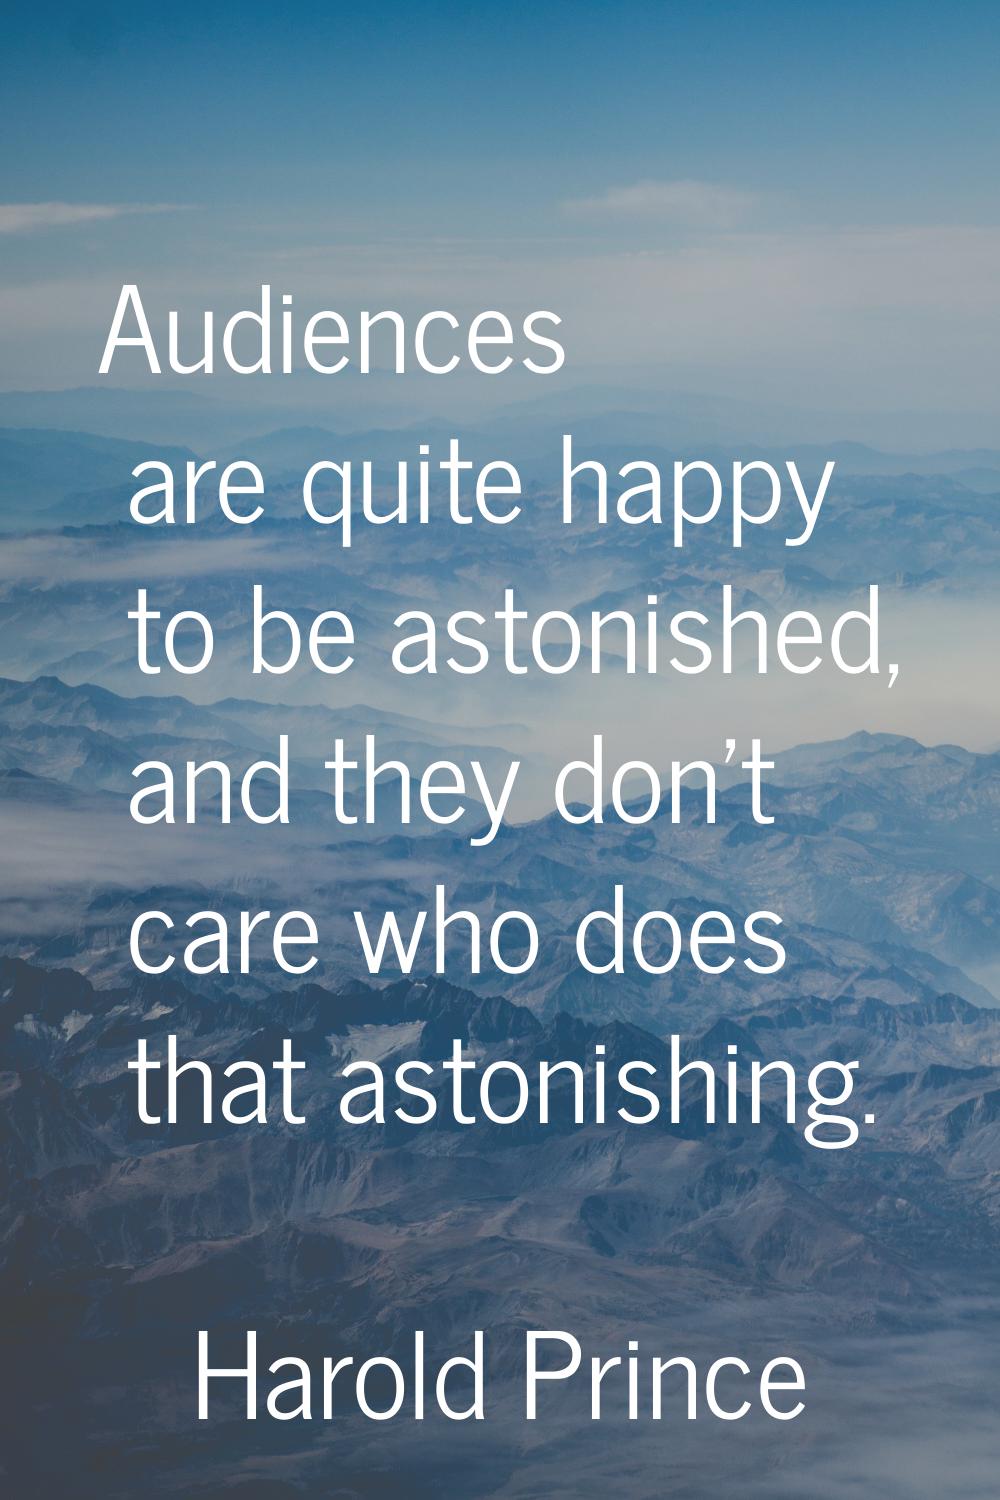 Audiences are quite happy to be astonished, and they don't care who does that astonishing.